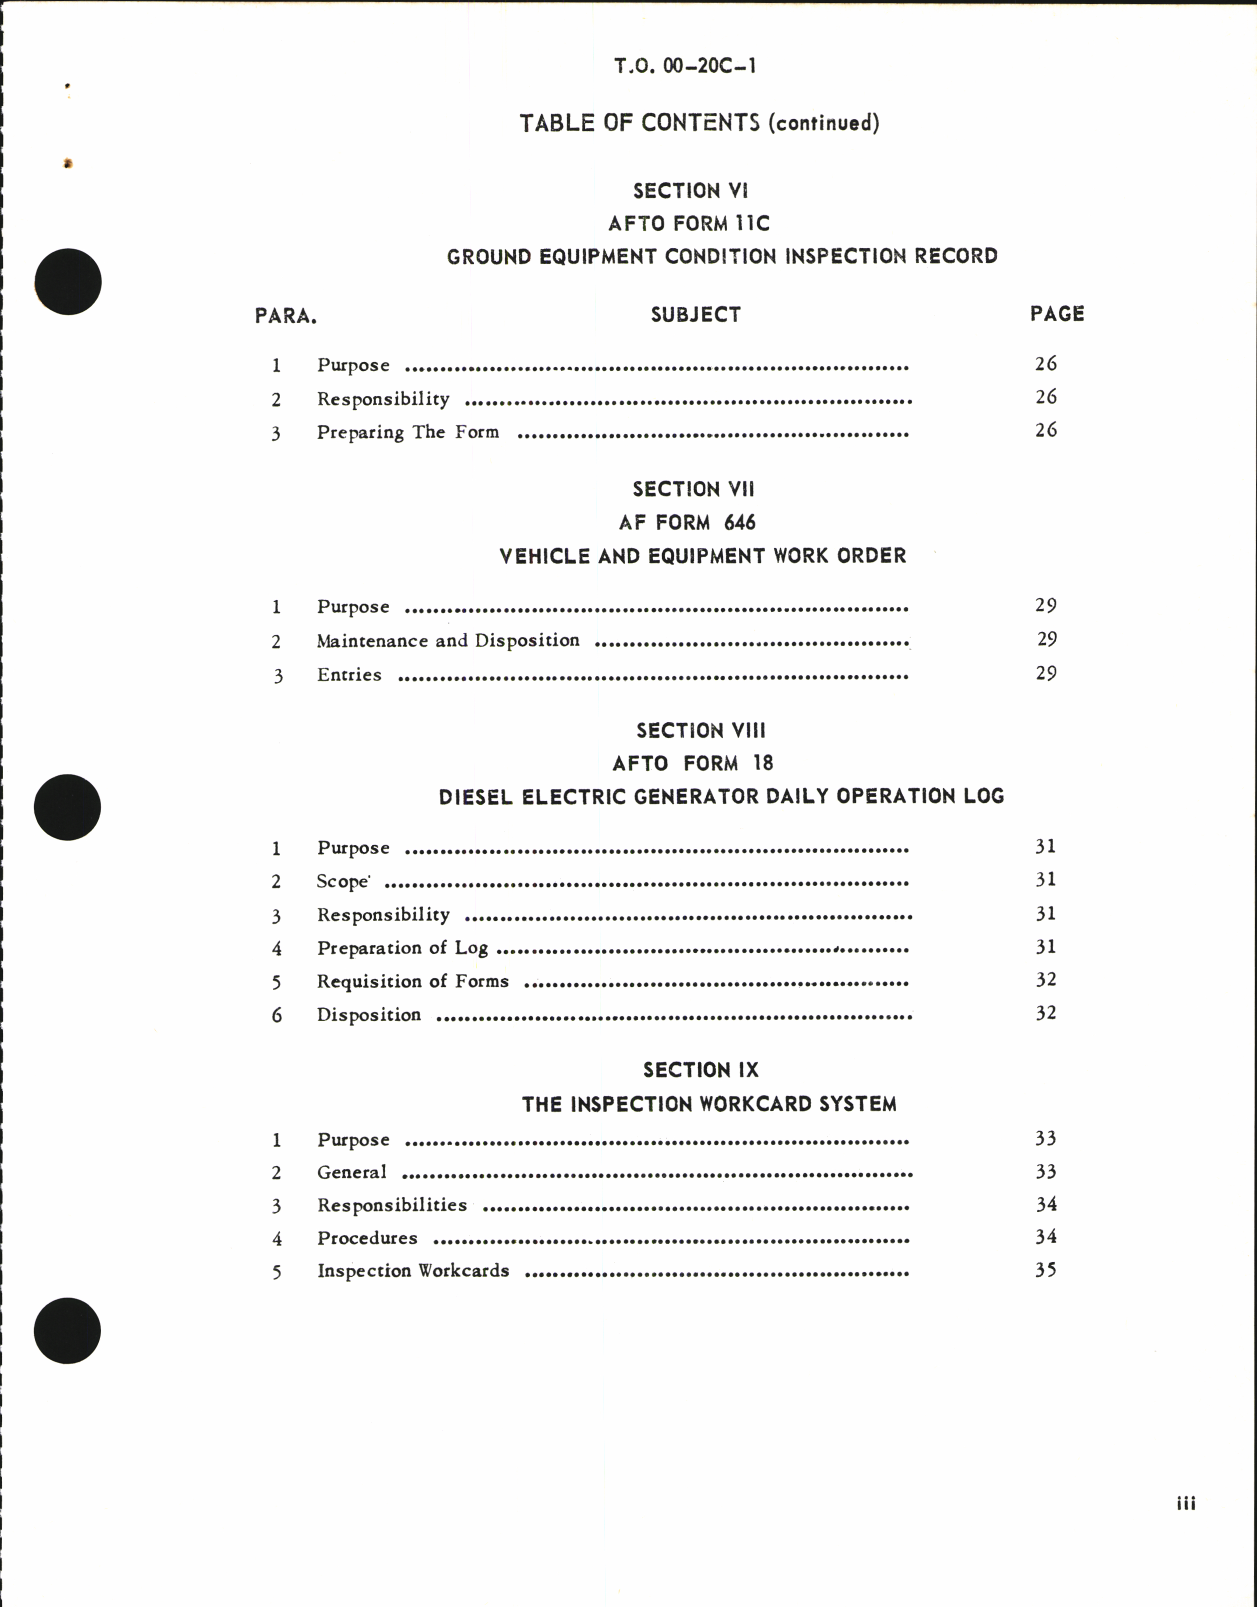 Sample page 5 from AirCorps Library document: Ground Equipment Inspection System